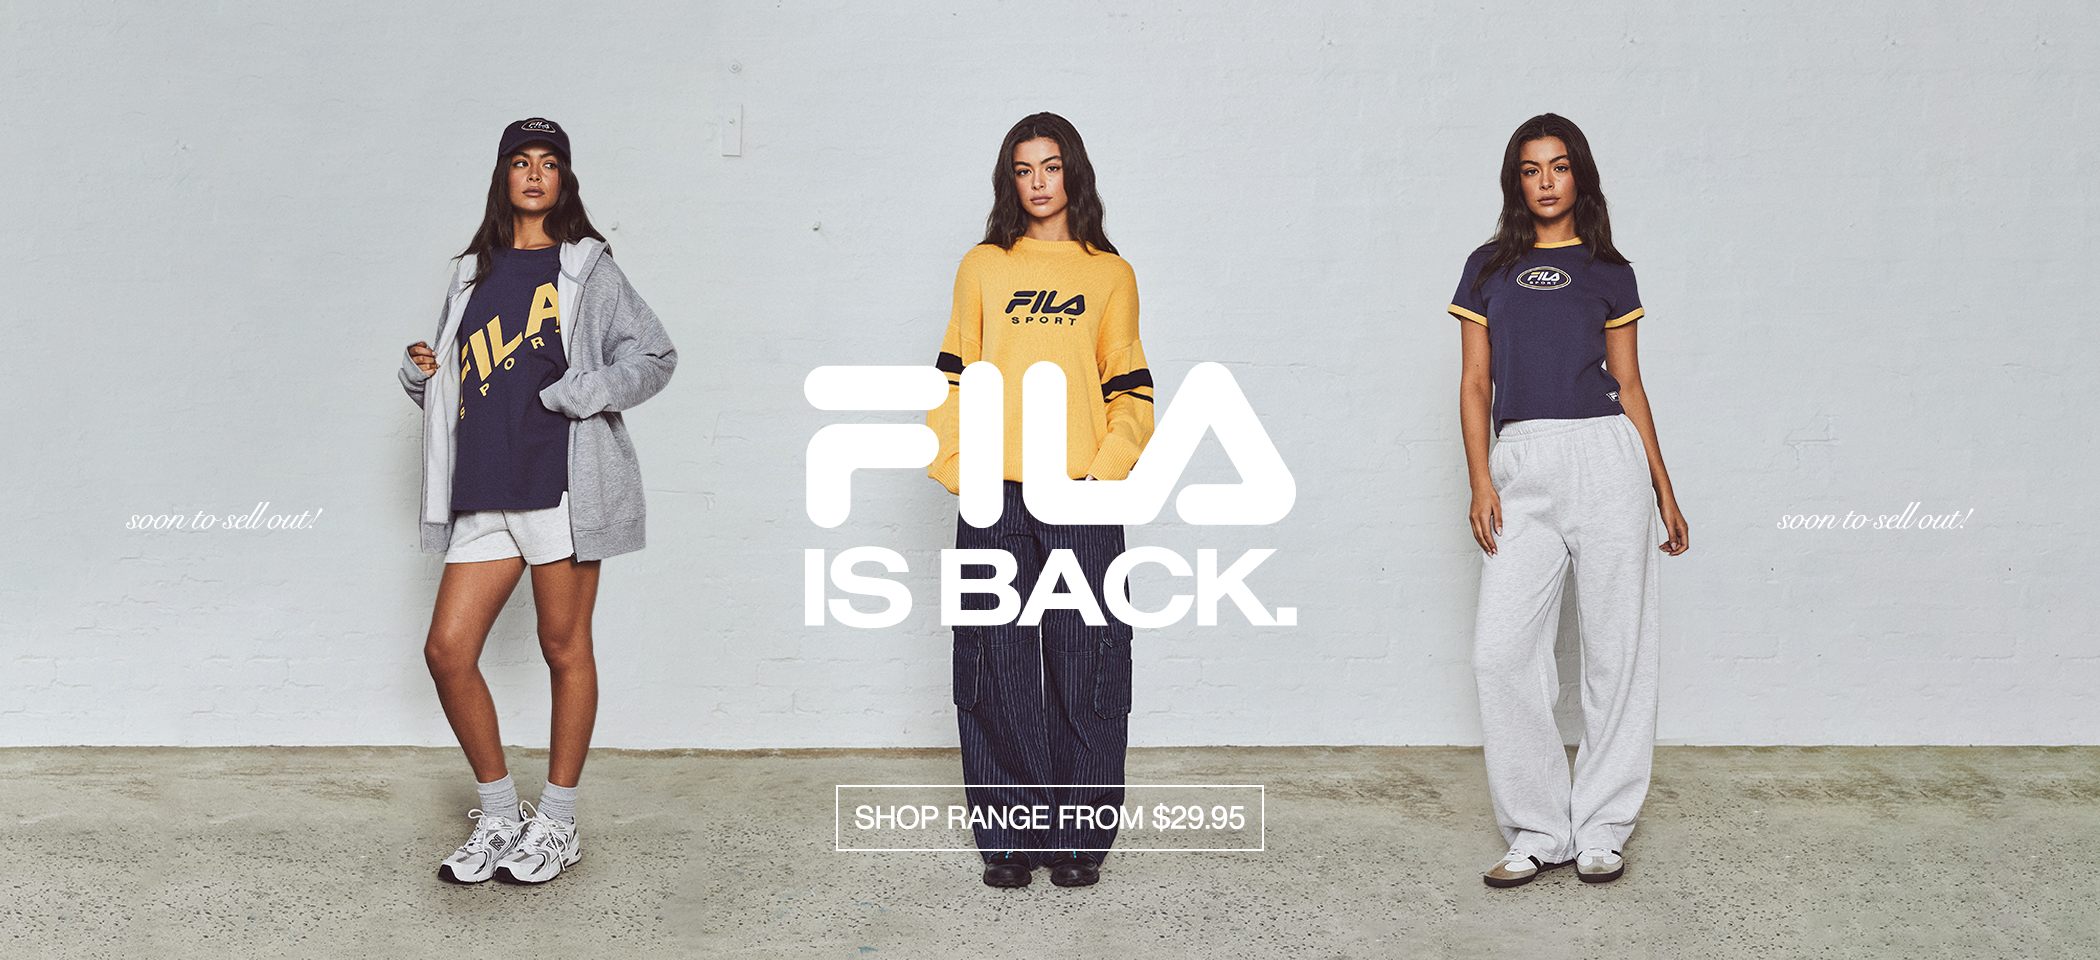 FILA IS BACK. Soon to sell out!